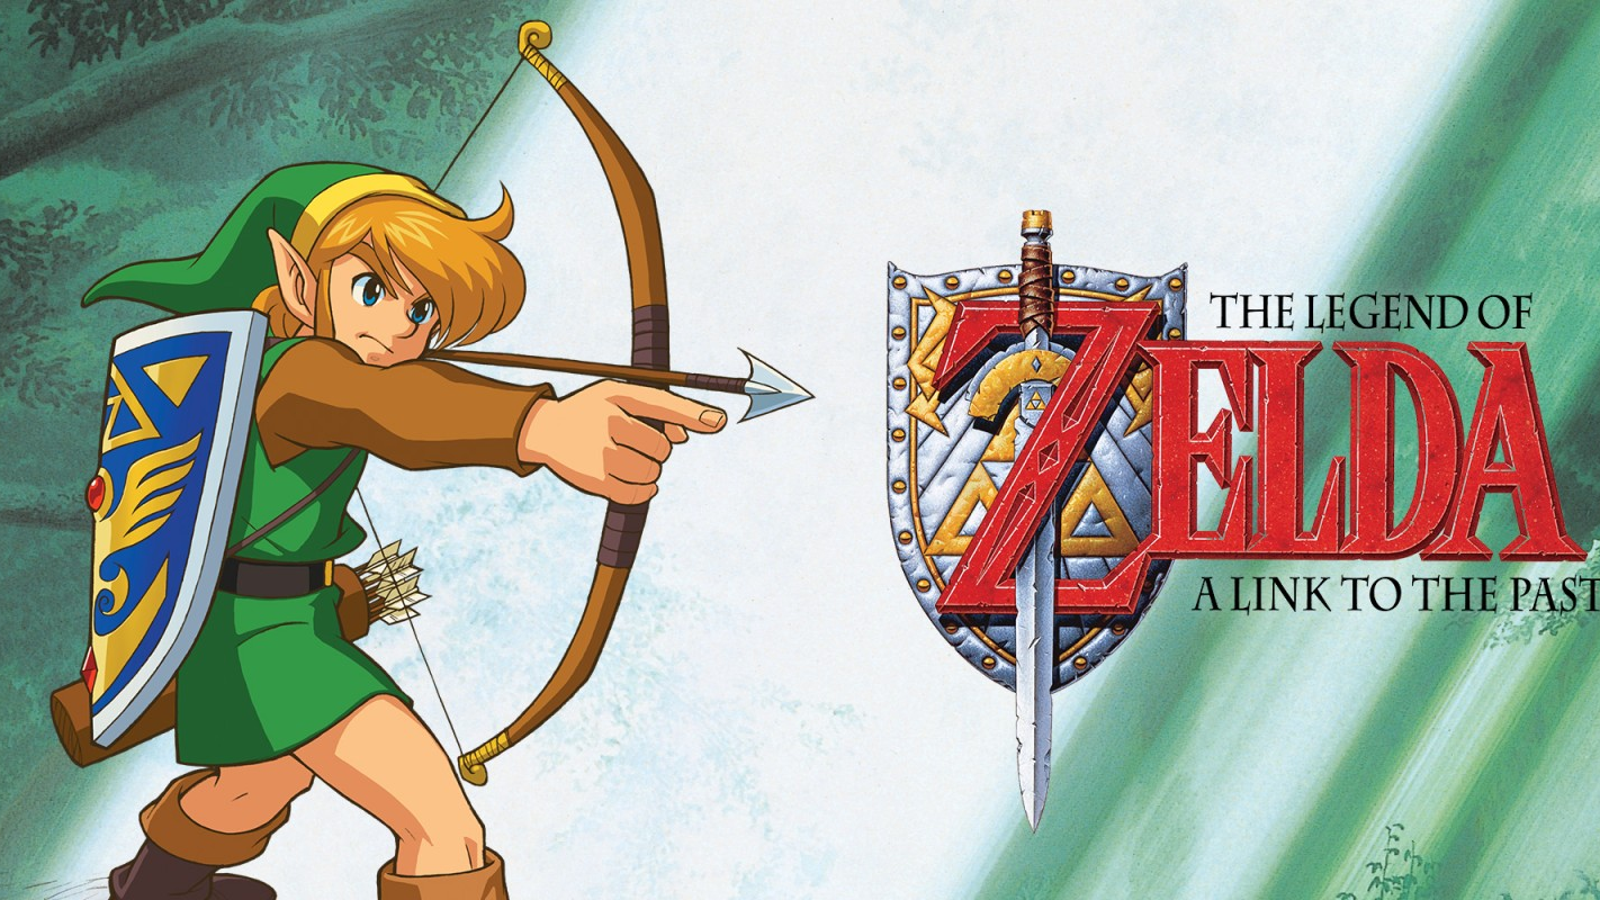 Why Zelda: A Link To the Past is still the best game ever